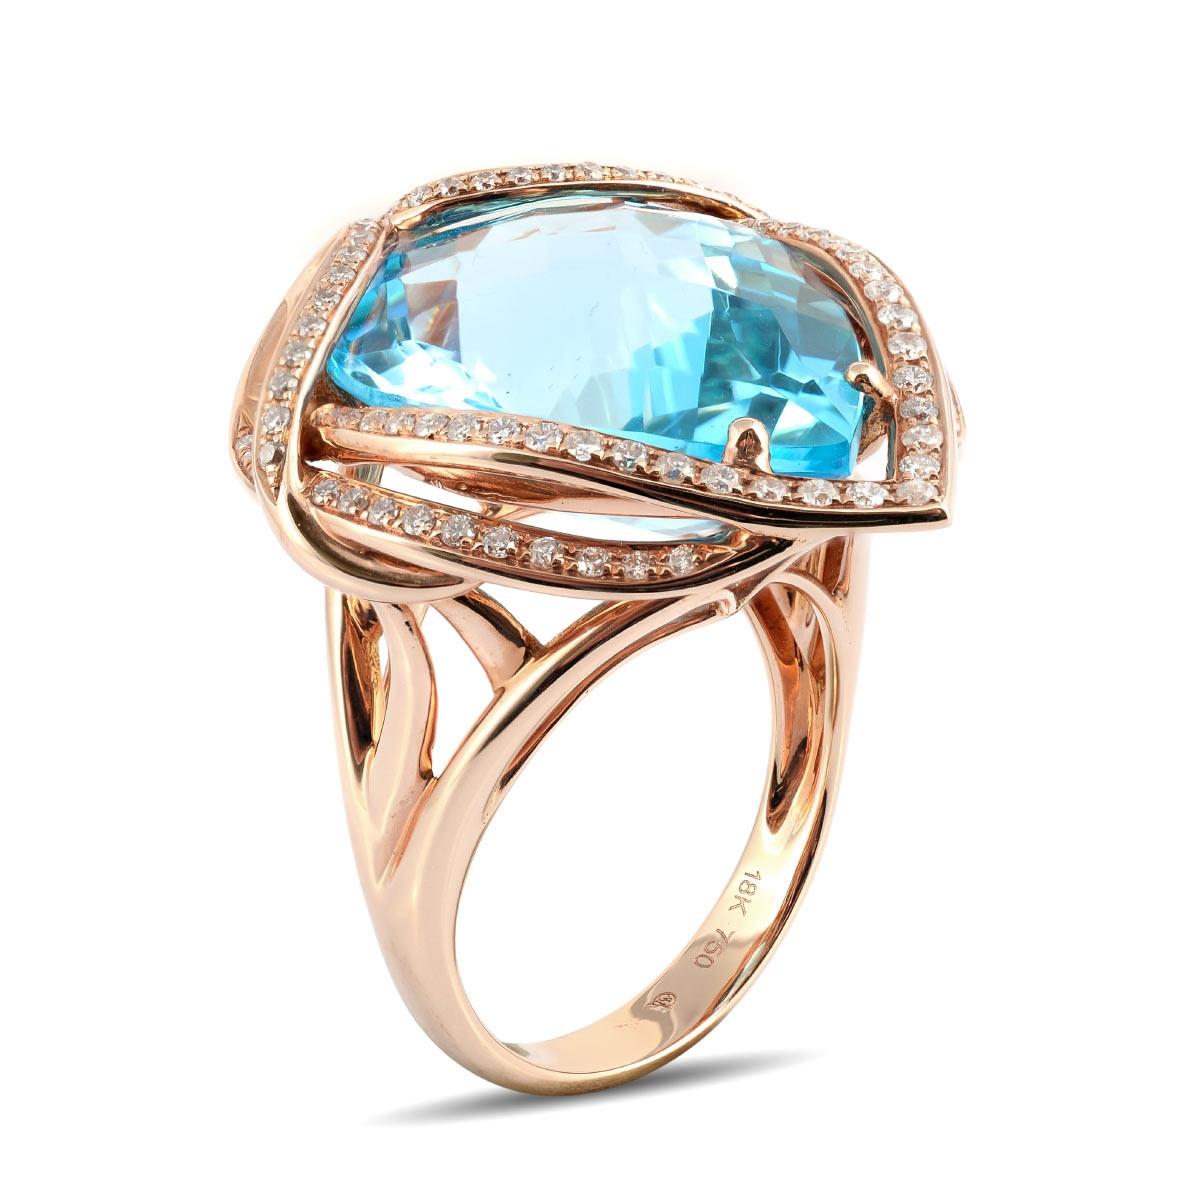 Elevate your style with this stunning designer ring. It features a captivating 20.16-carat sky blue Topaz as its centerpiece, drawing all eyes to its breathtaking beauty. The shank of the ring is an intricate work of art, twisting and turning as it